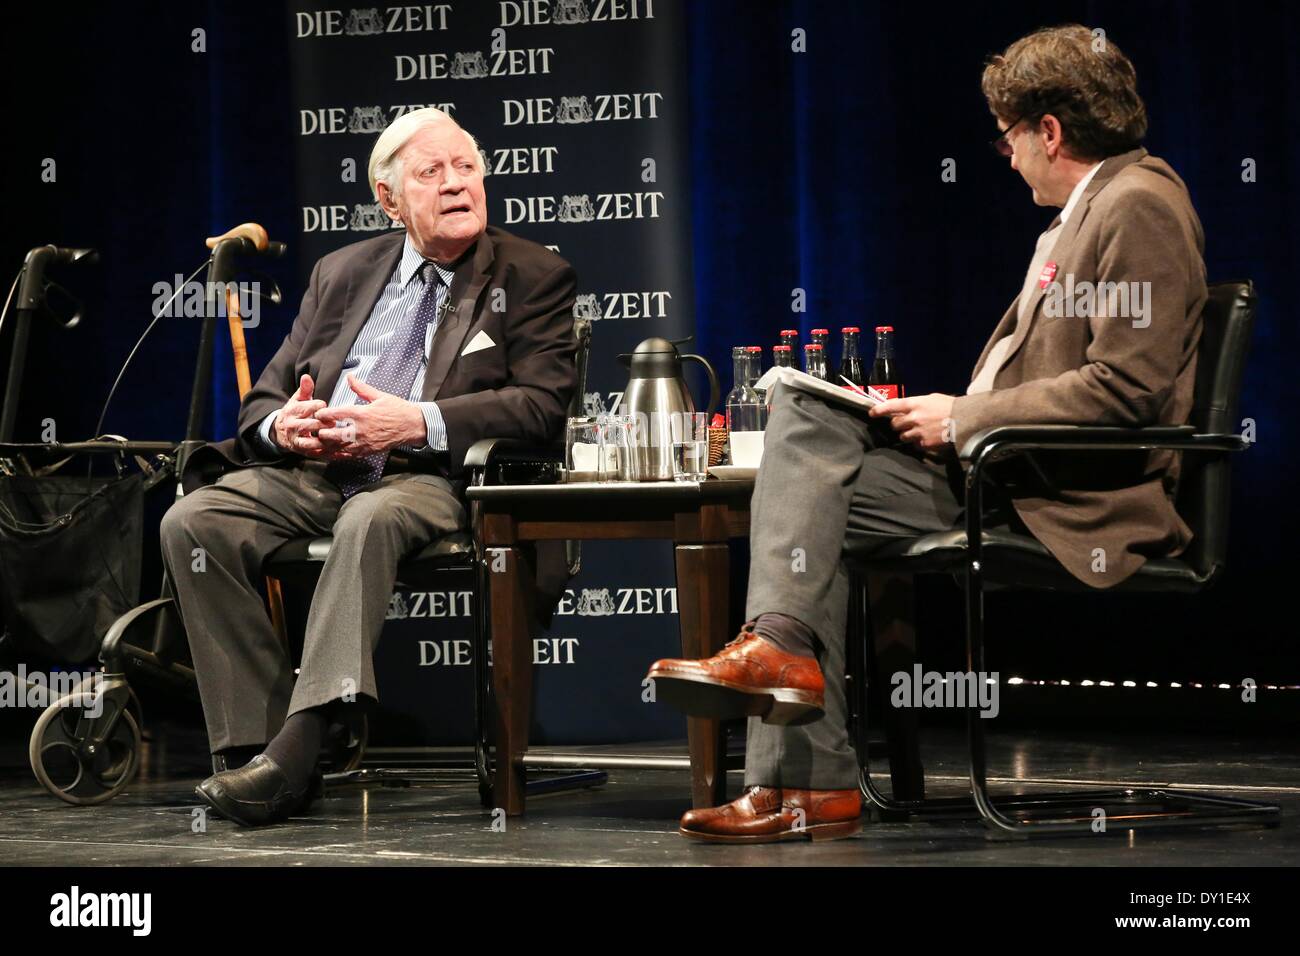 Hamburg, Germany. 02nd Apr, 2014. Former German Chancellor and co-publisher of newspaper 'Die Zeit' Helmut Schmidt (L, SPD) and editor-in-chief of 'Die Zeit' Giovanni di Lorenzo sit on the podium during the series of events 'The long night of Die Zeit' at Schauspielhaus in Hamburg, Germany, 02 April 2014. The former German Chancellor answered collected readers' questions on Hamburg. 'Die Zeit' will for the first time be published with a local section for Hamburg on 03 April 2014. Photo: BODO MARKS/DPA/Alamy Live News Stock Photo